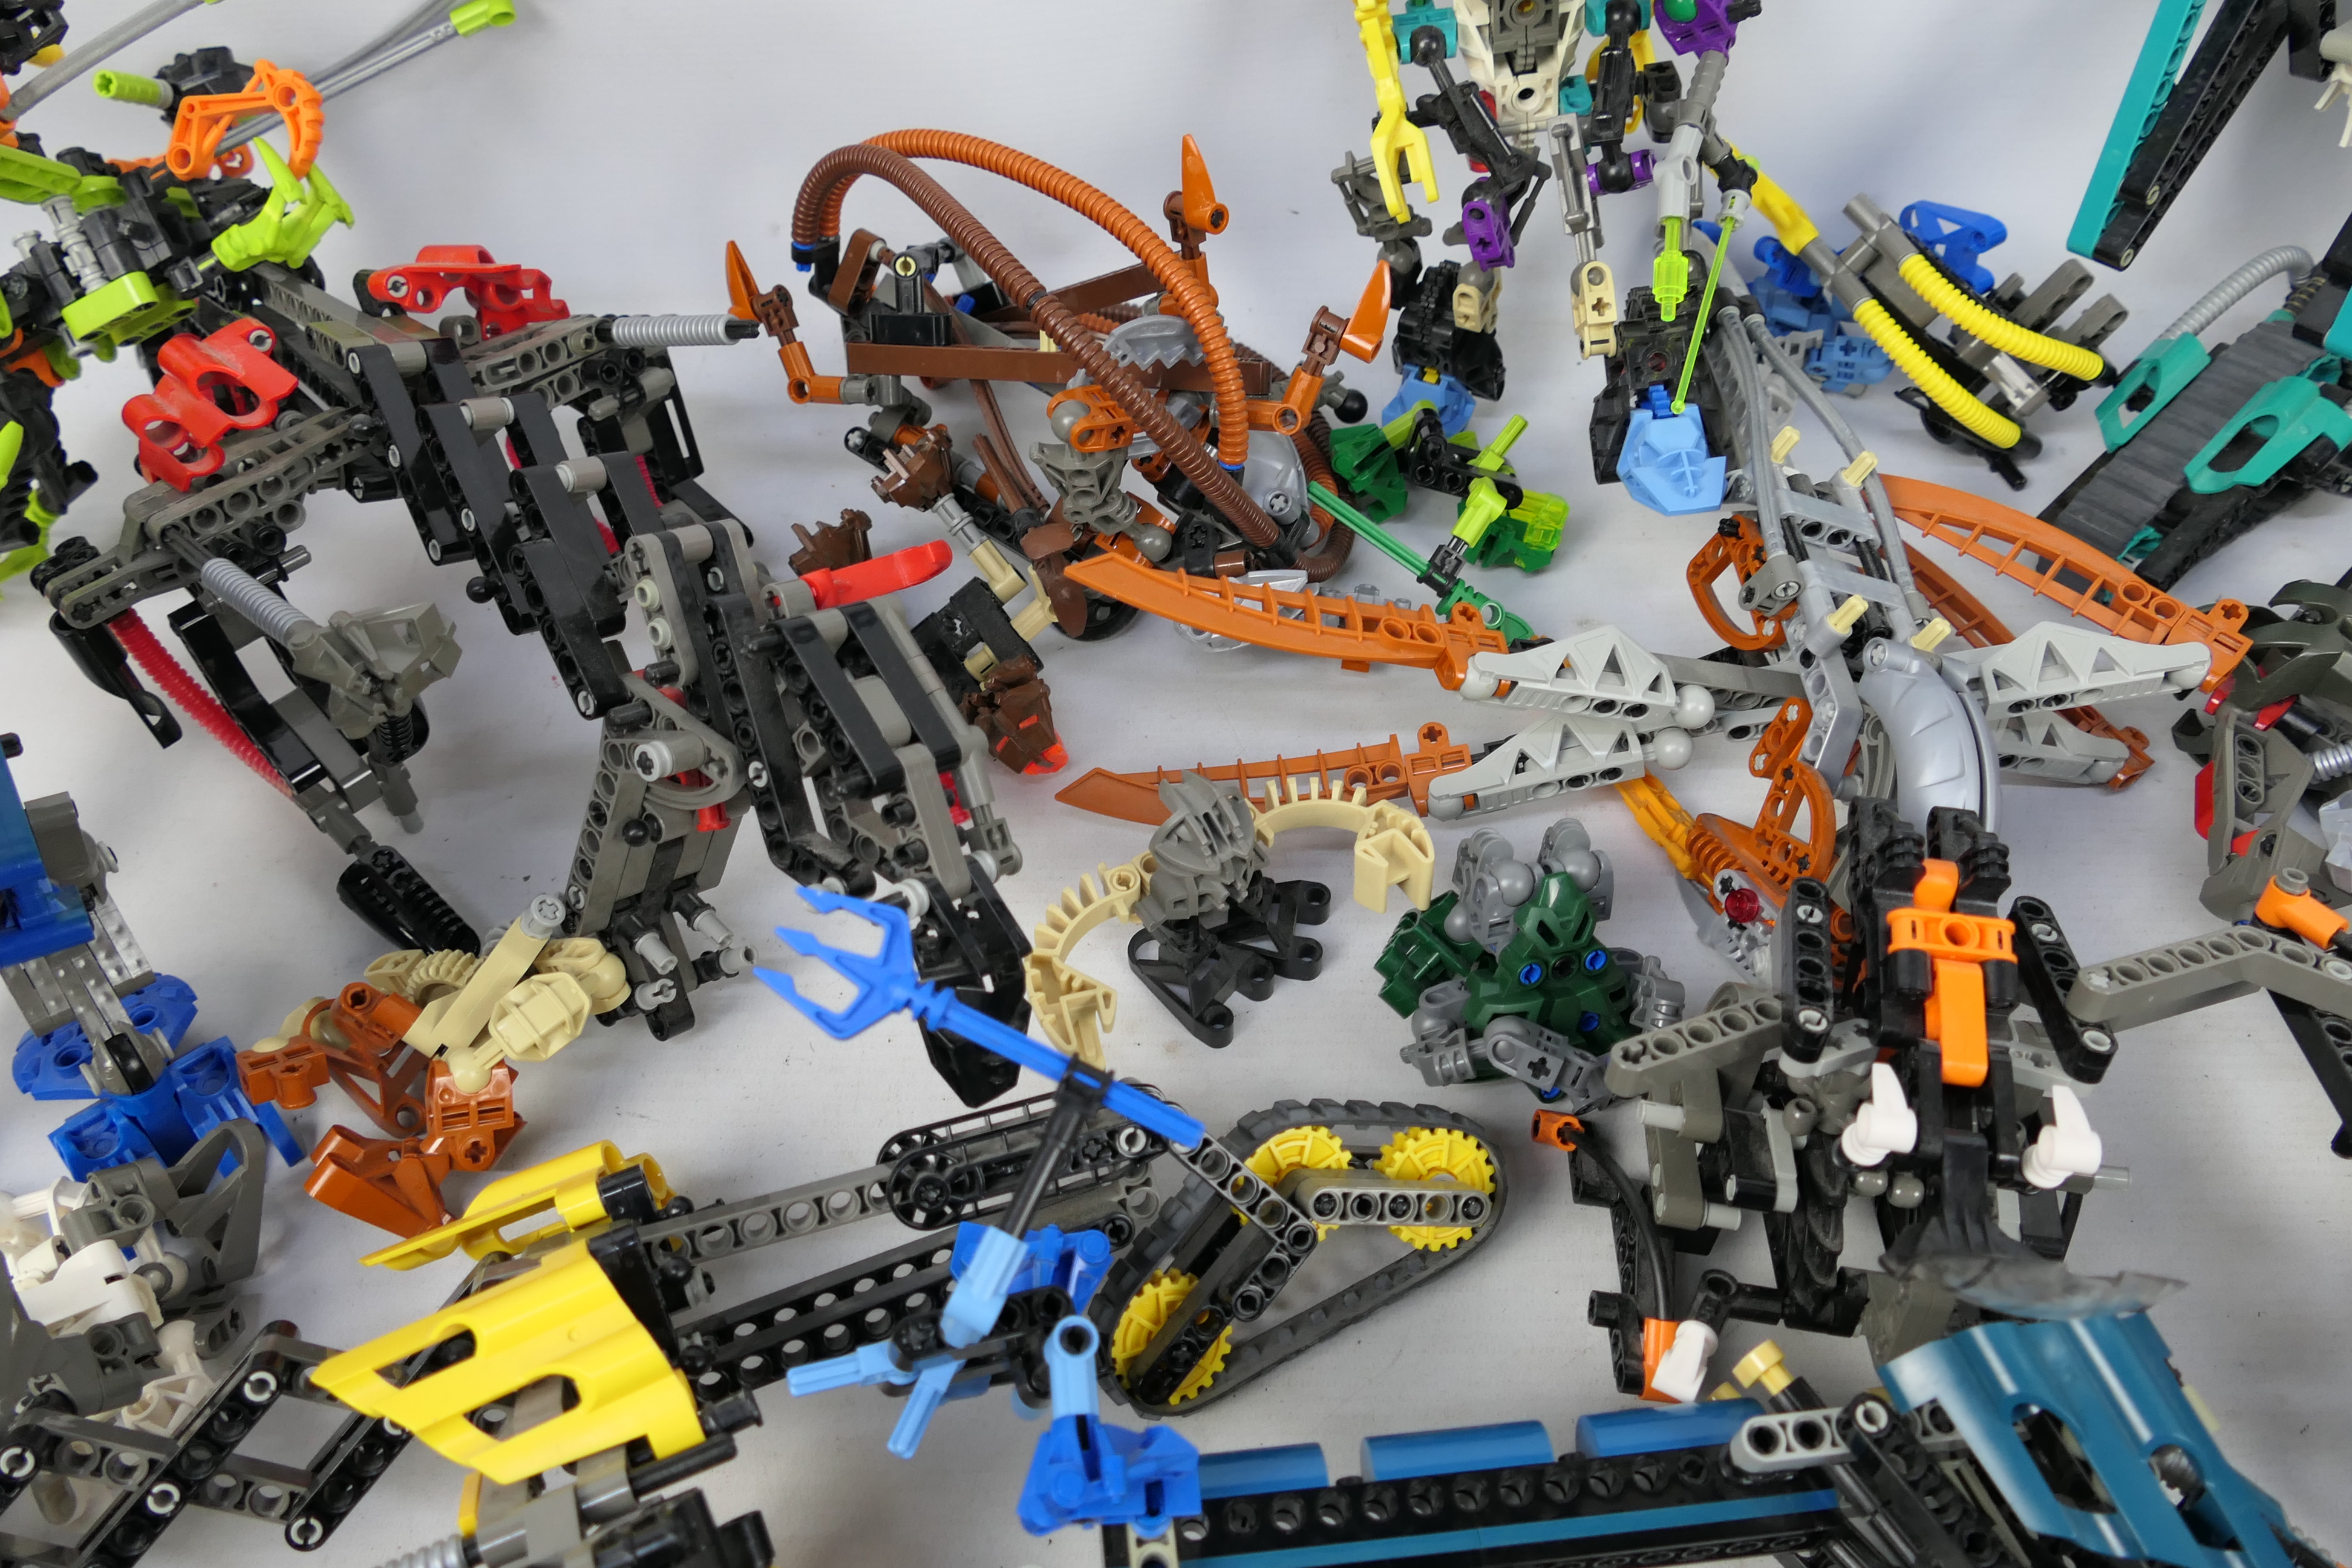 Lego - Bionicles - A collection of unboxed Lego including 15 x large Bionicle figures, - Image 5 of 7